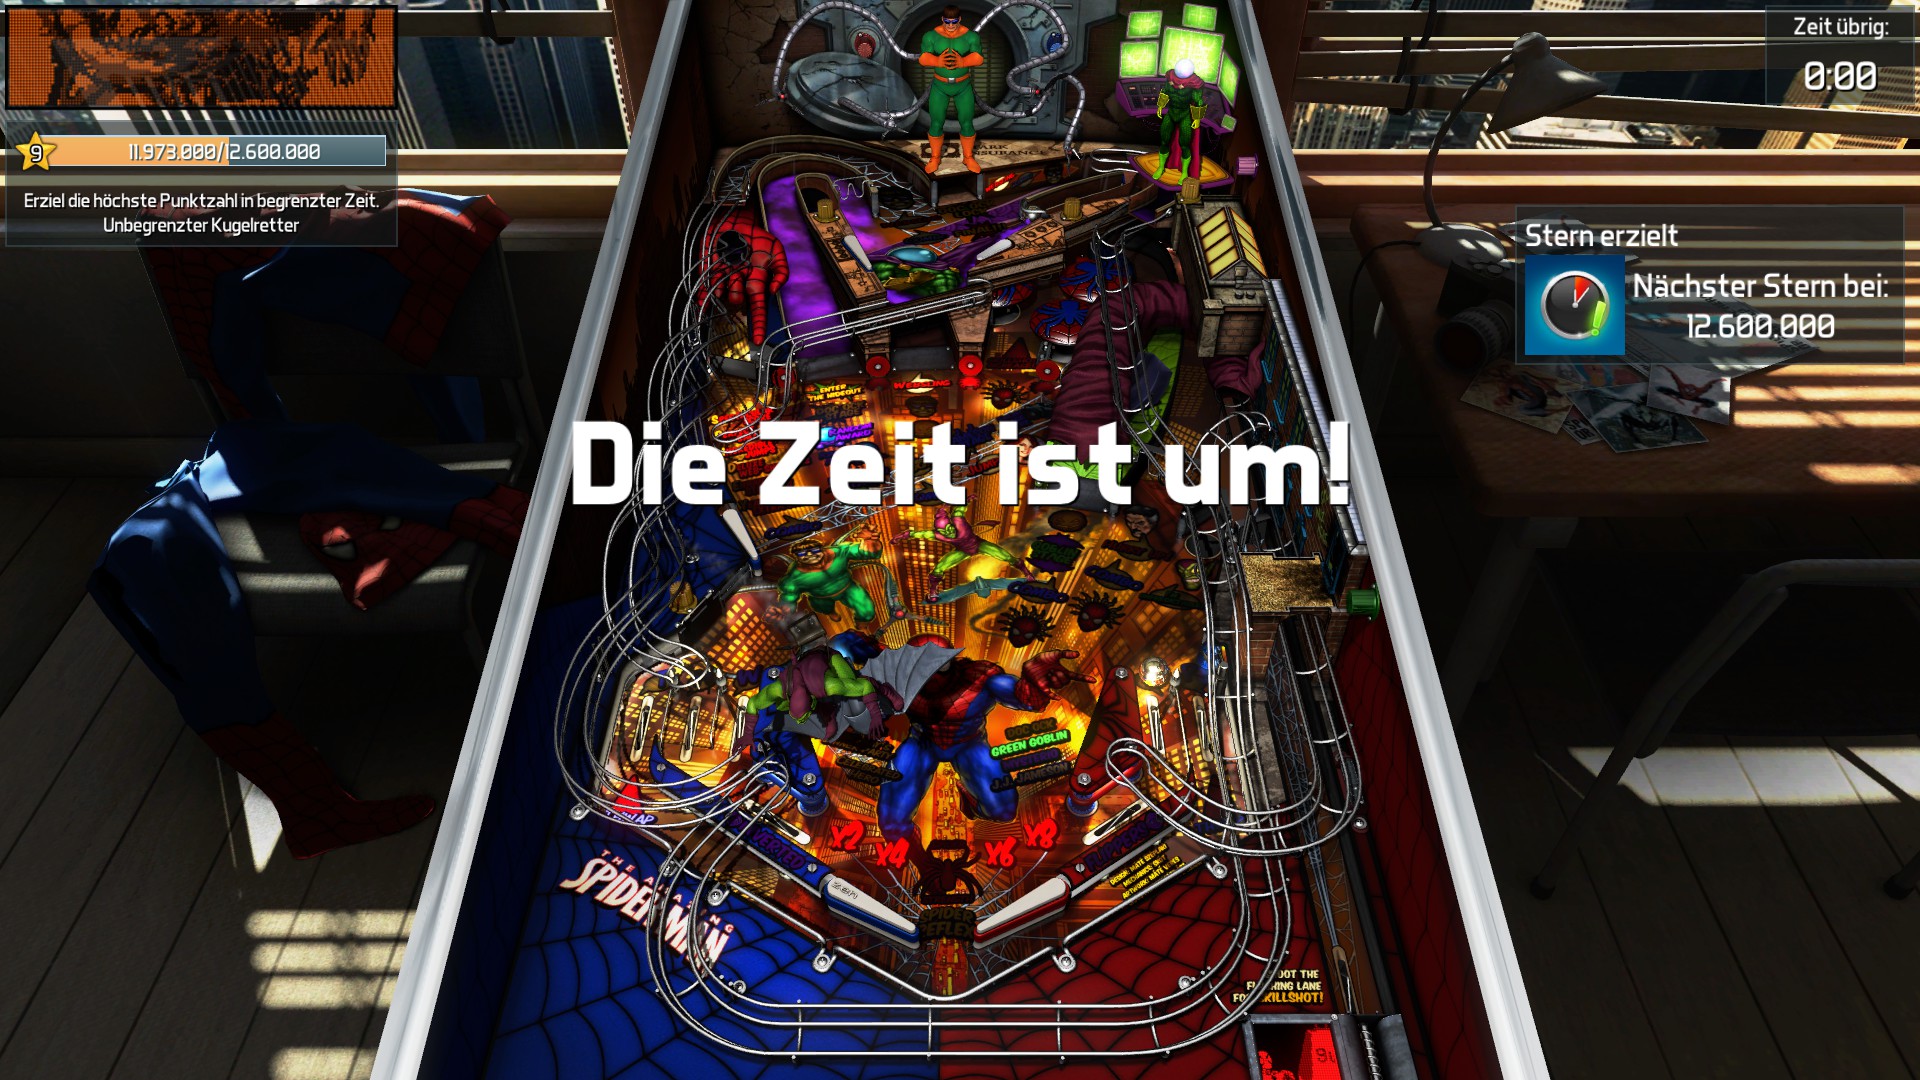 e2e4: Pinball FX3: Marvel: The Amazing Spider-Man [5 Minute] (PC) 11,973,000 points on 2022-05-24 16:28:58